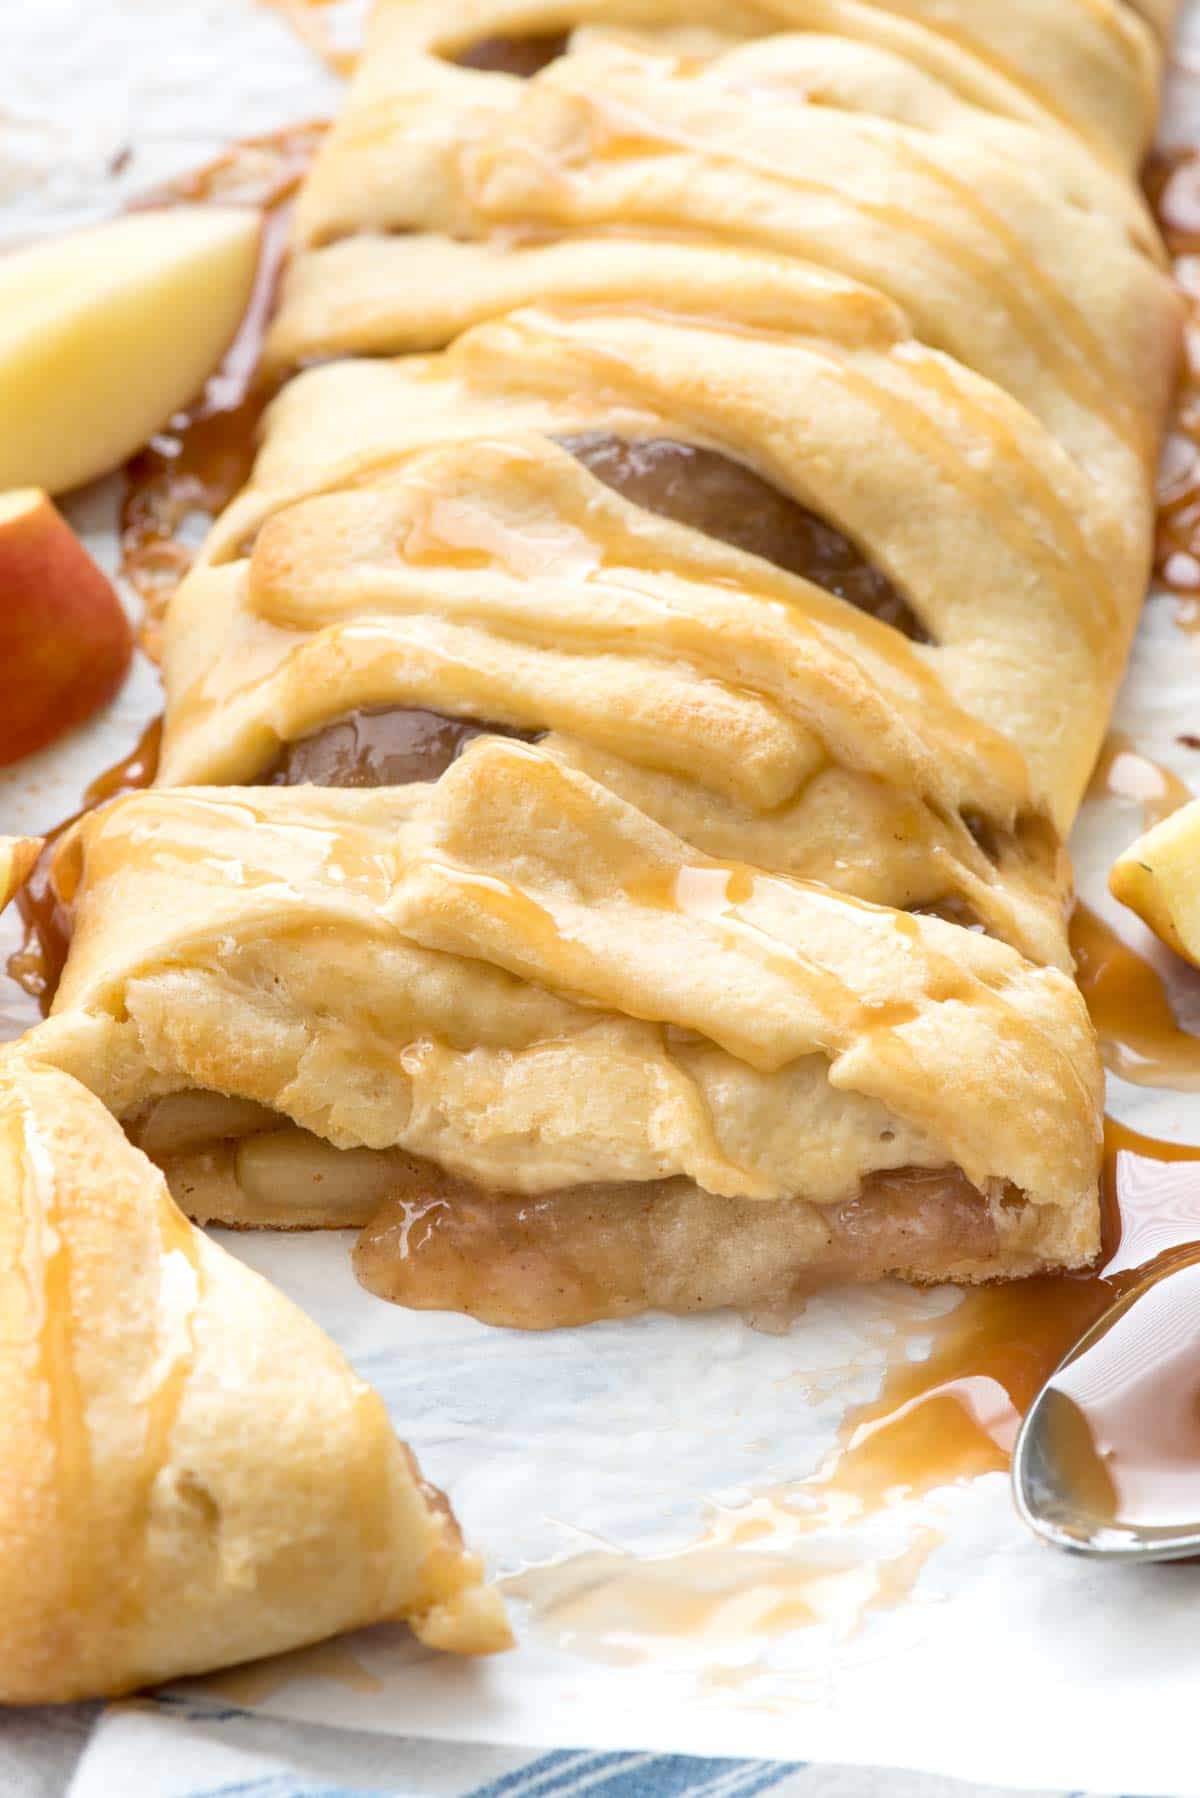 Easy Caramel Apple Strudel - this easy danish braid has just 3 ingredients and is the easiest breakfast or dessert recipe ever! Caramel Apple is the perfect fall flavor, especially in a pastry!